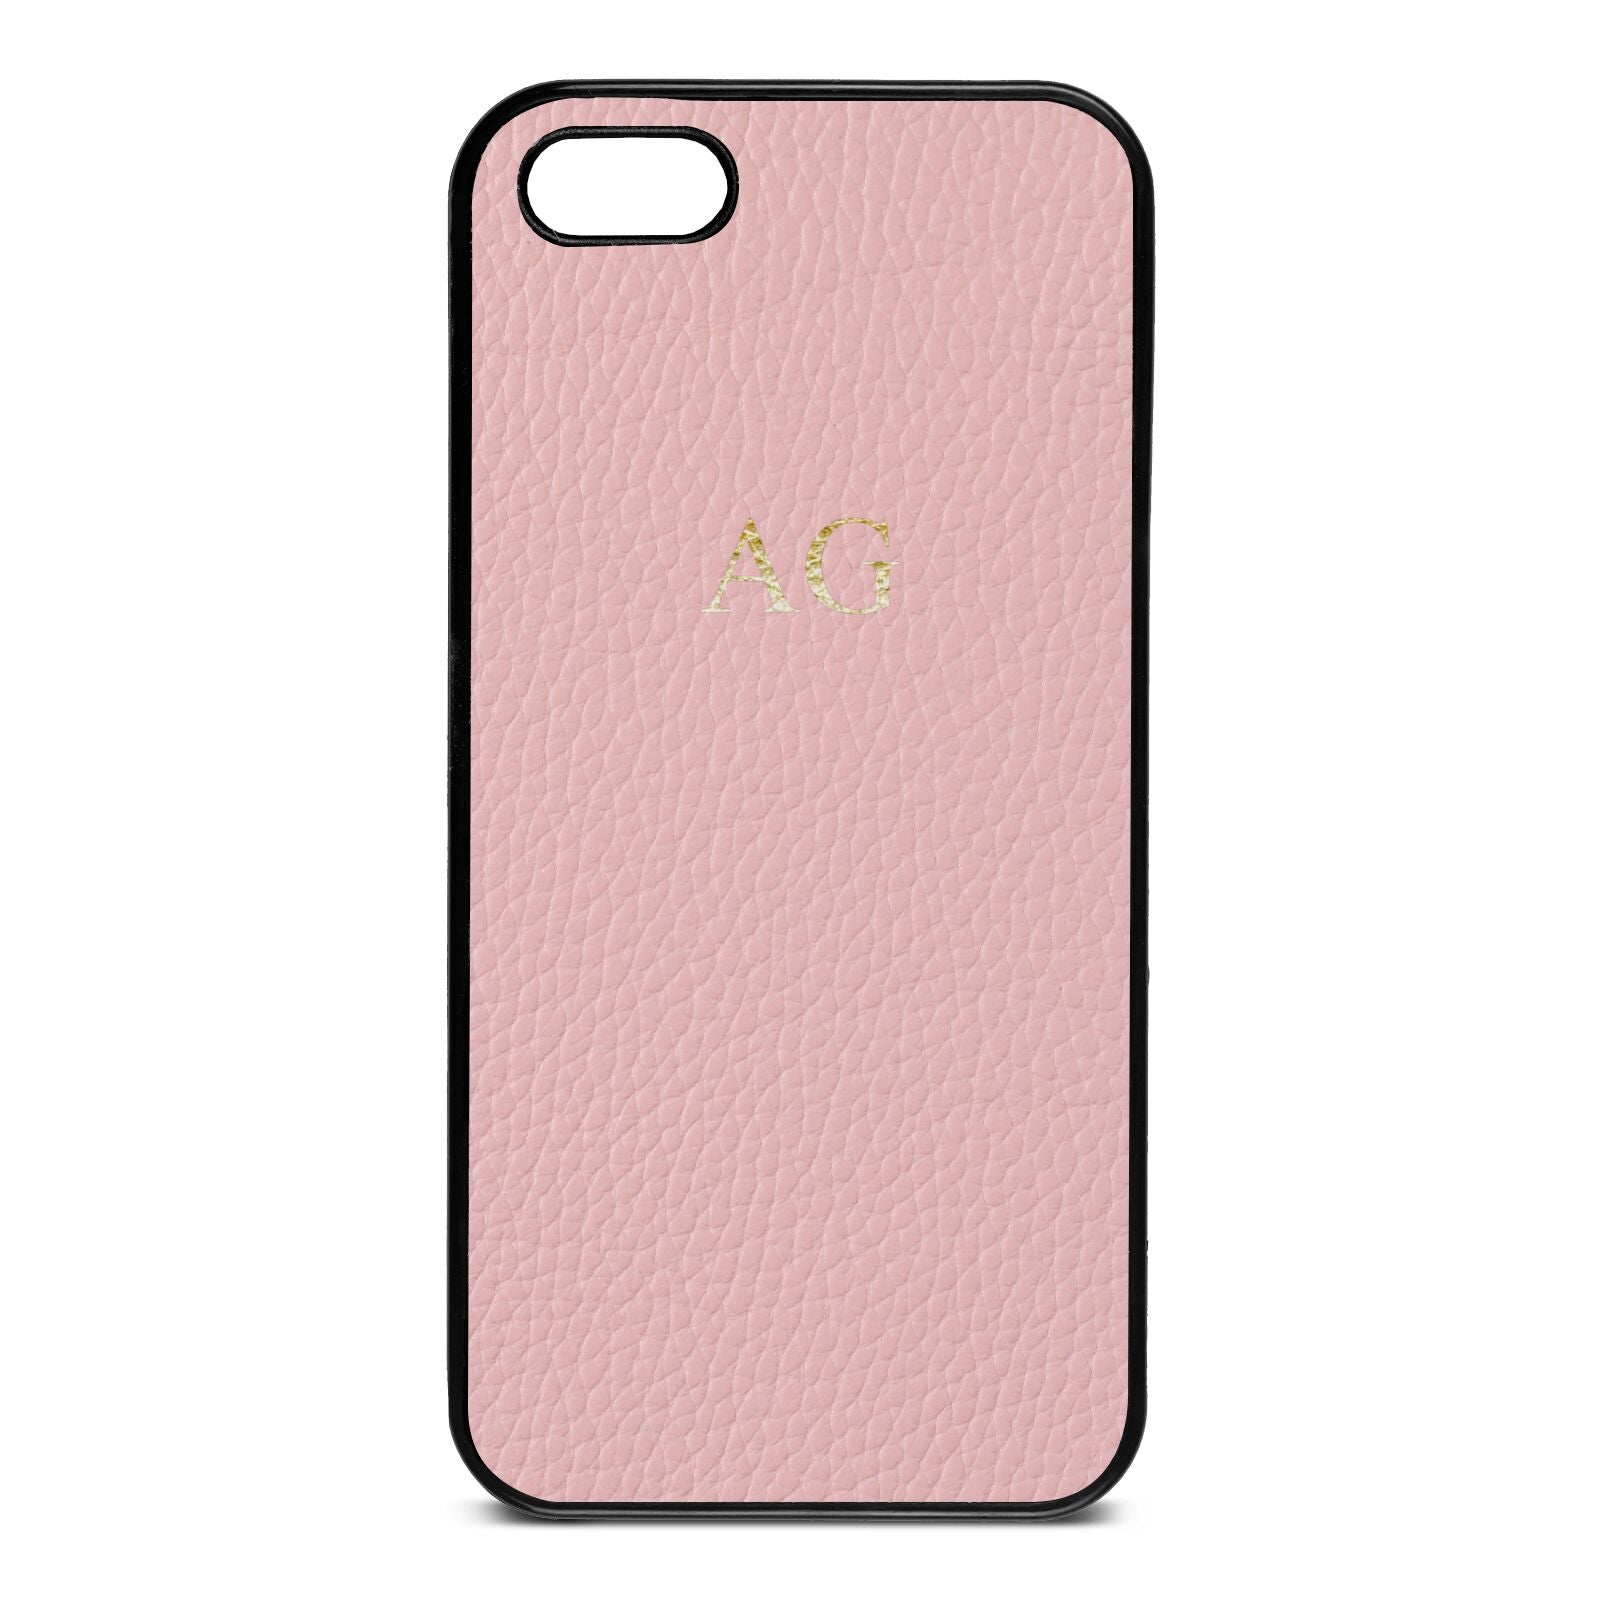 Personalised Pink Pebble Leather iPhone 5 Case